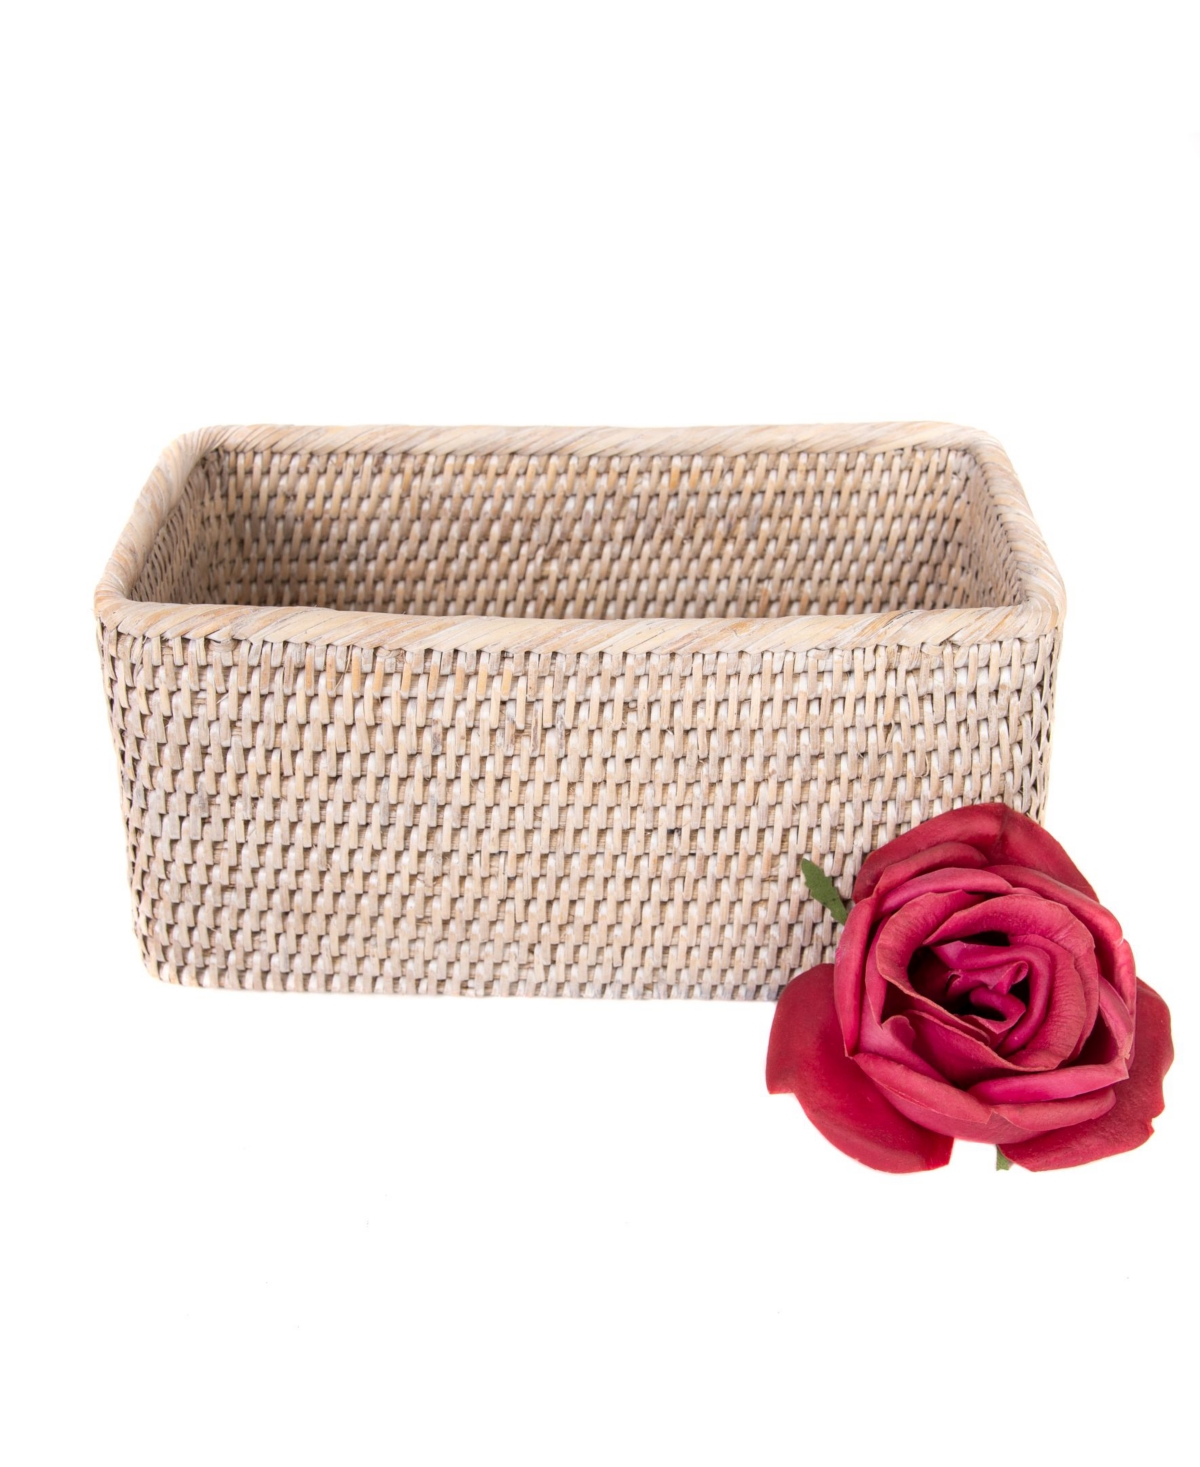 Shop Artifacts Trading Company Artifacts Rattan Rectangular Basket In Off-white